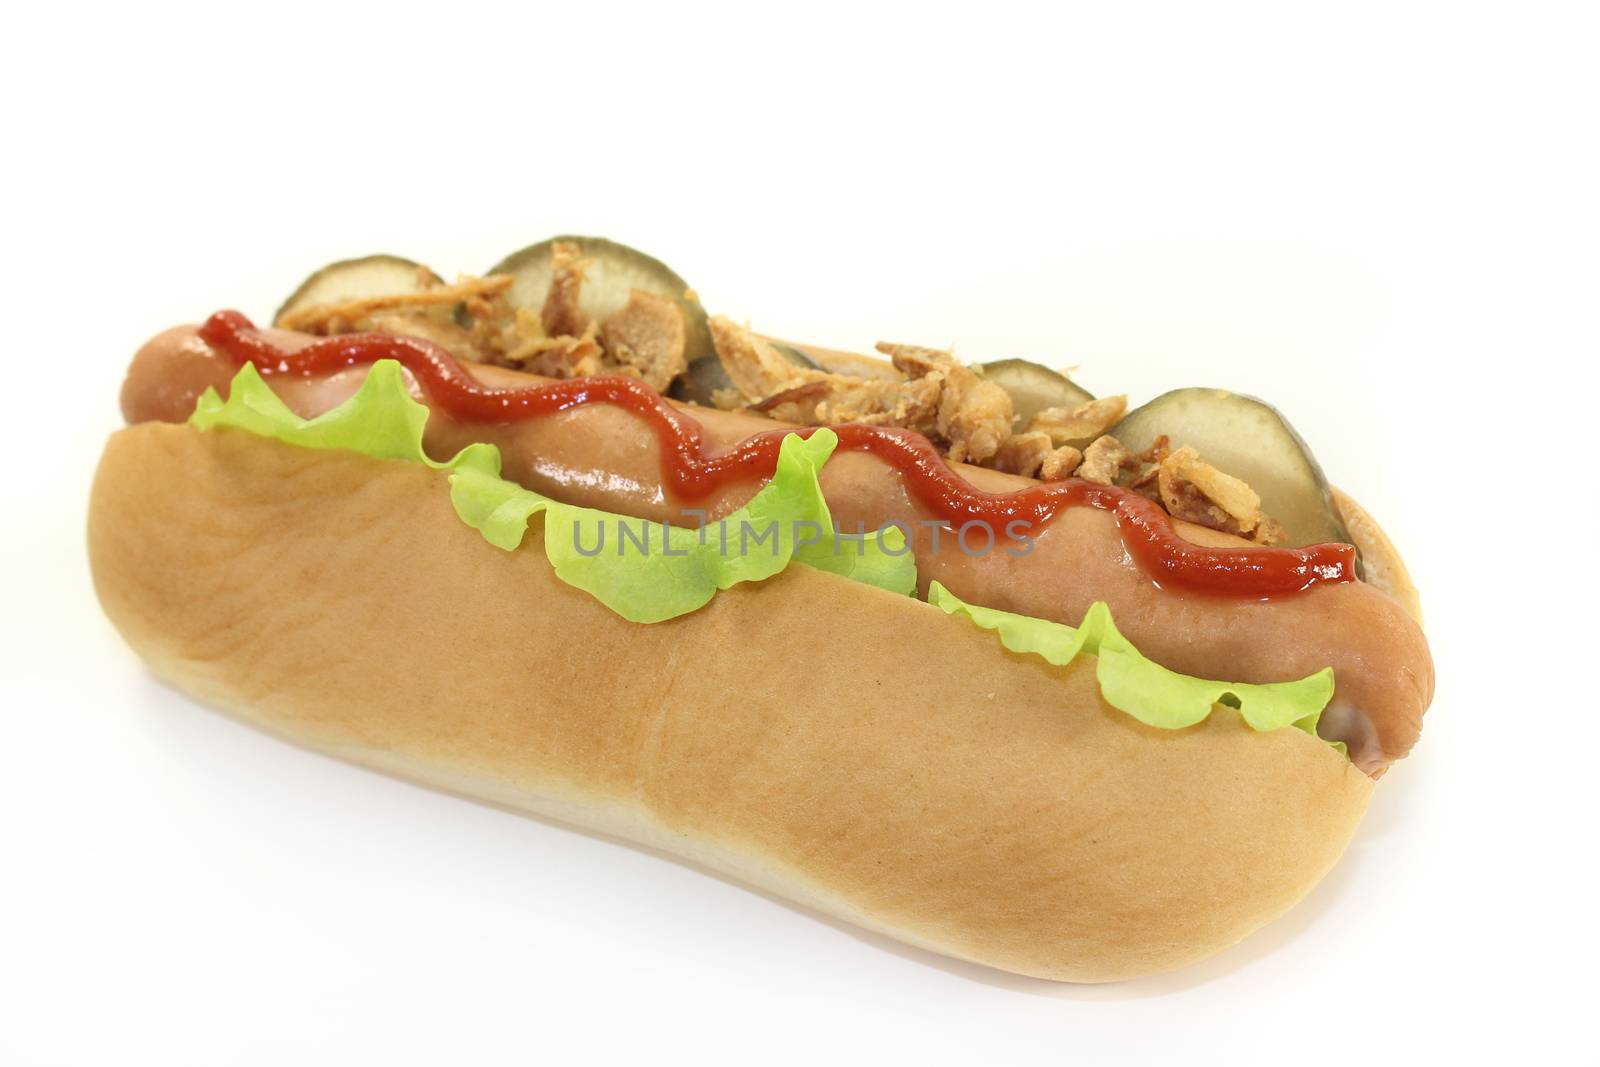 a hot dog with pickle and salad against white background